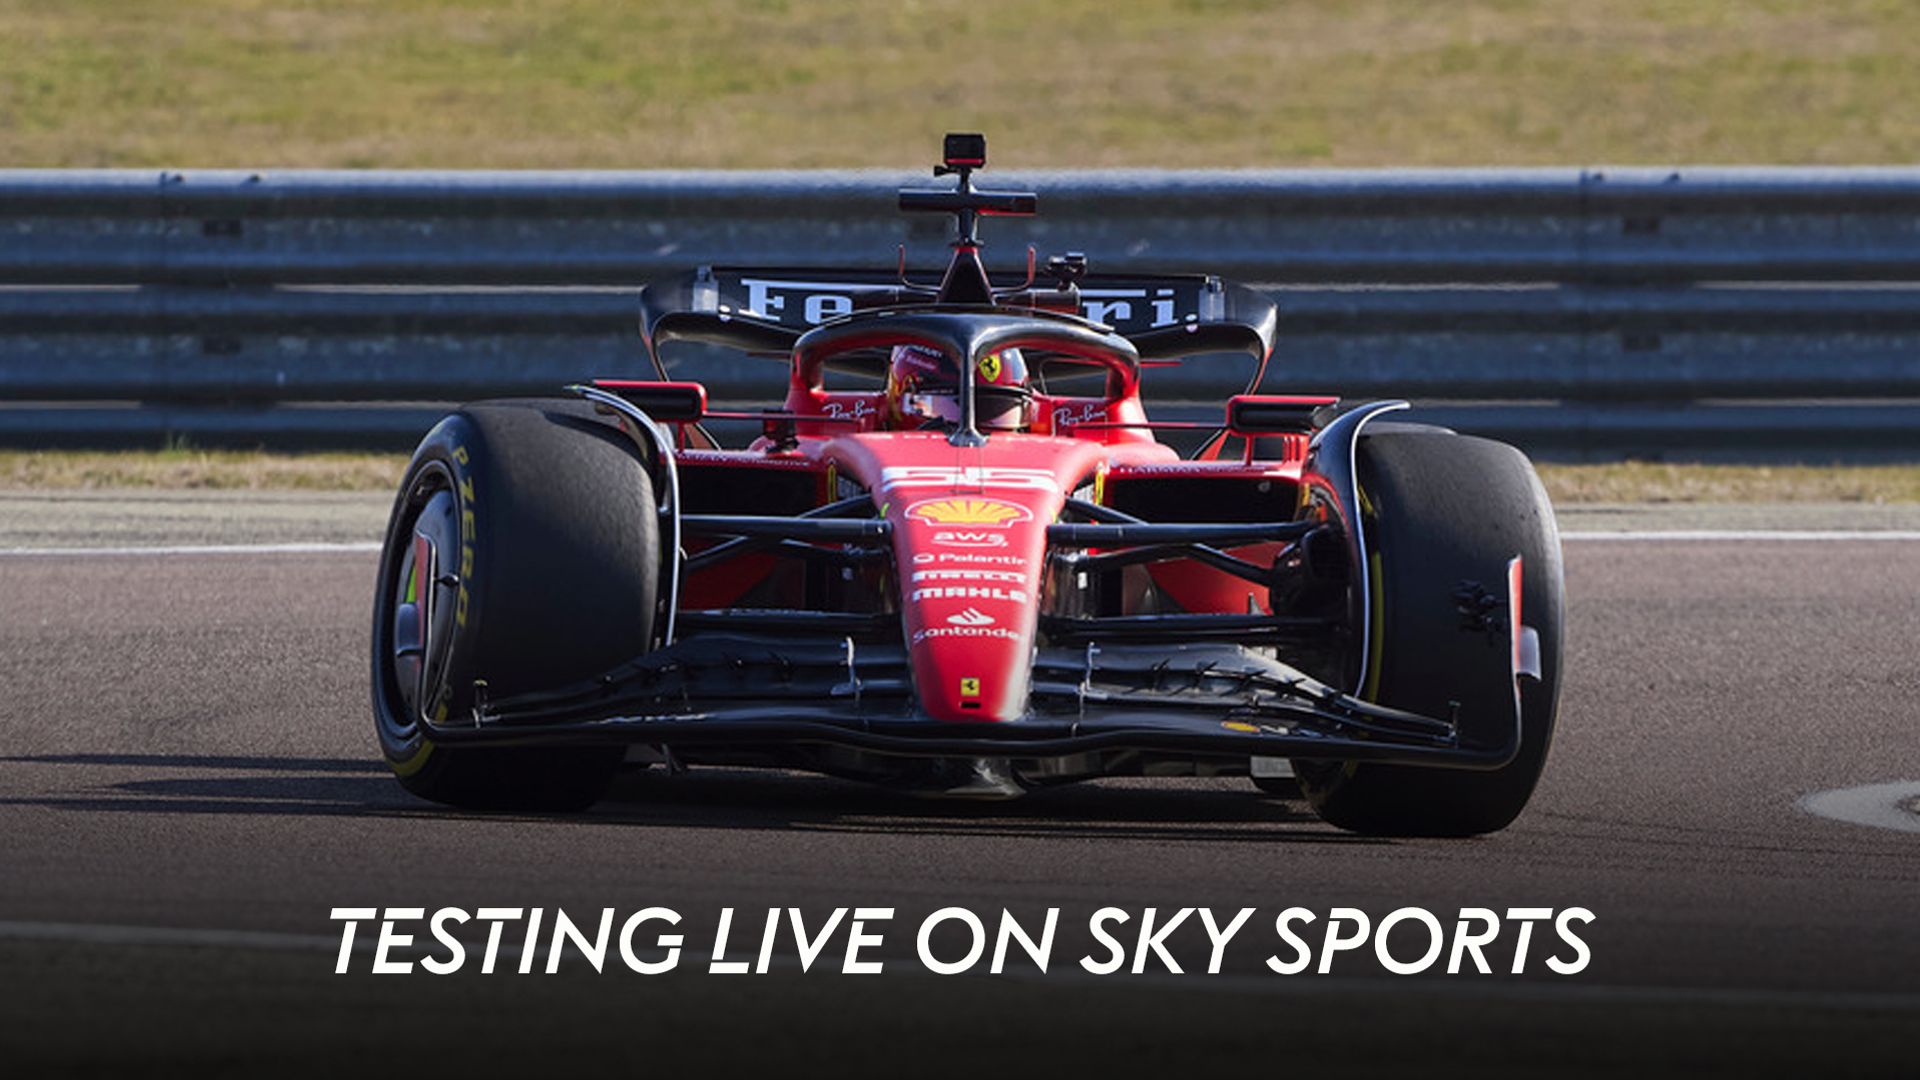 Everything you need to know about F1 pre-season testing on Sky Sports